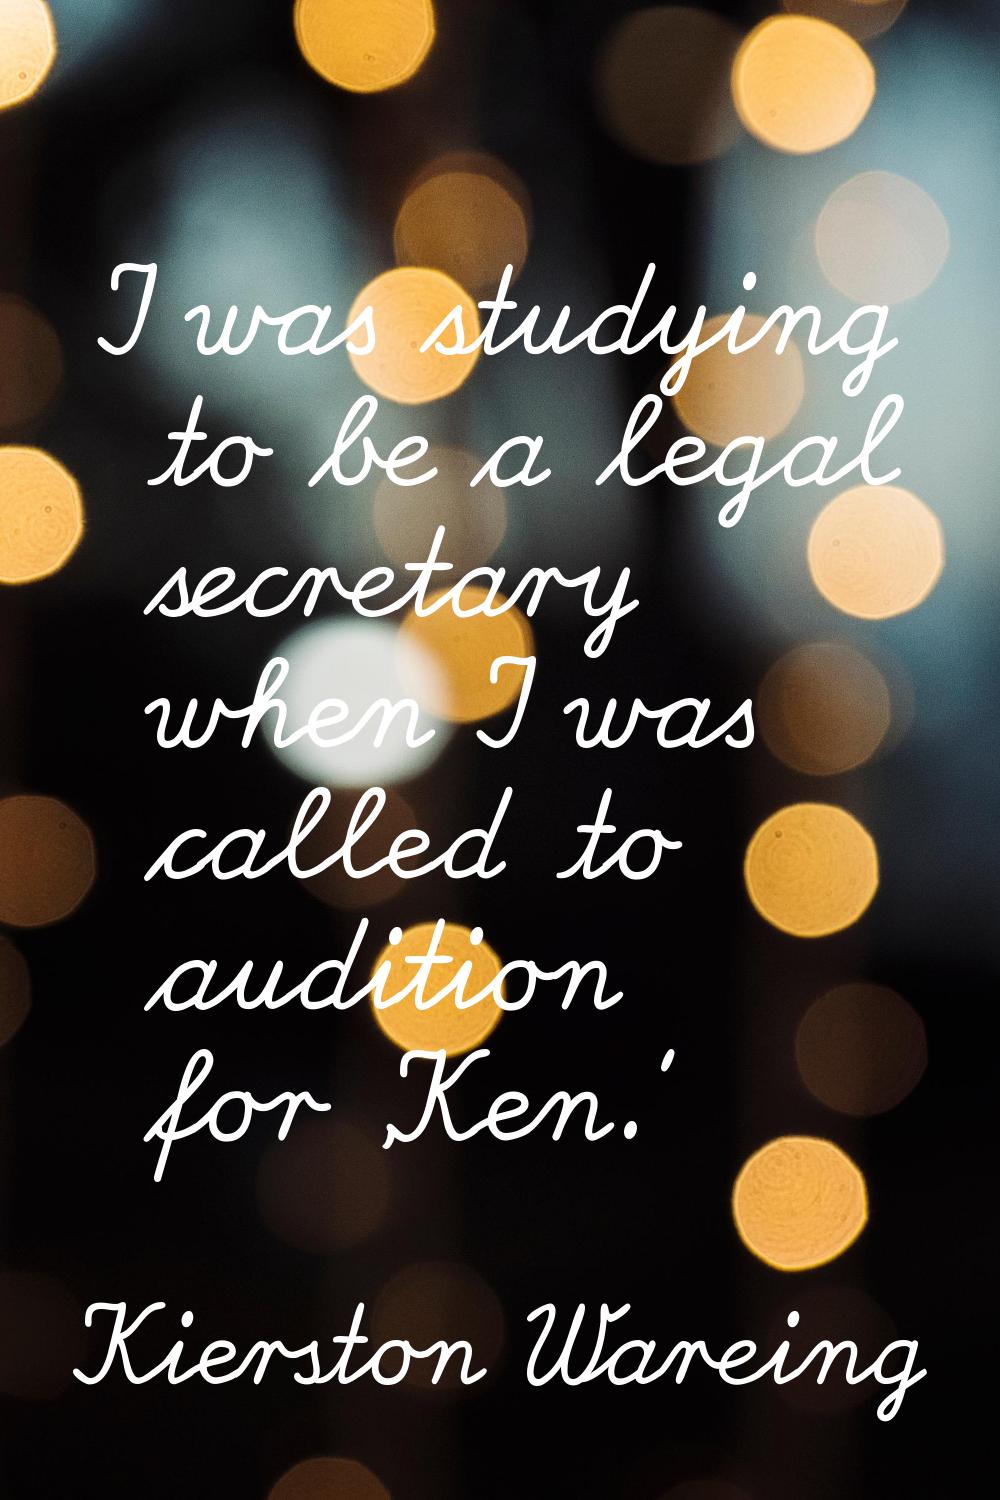 I was studying to be a legal secretary when I was called to audition for 'Ken.'